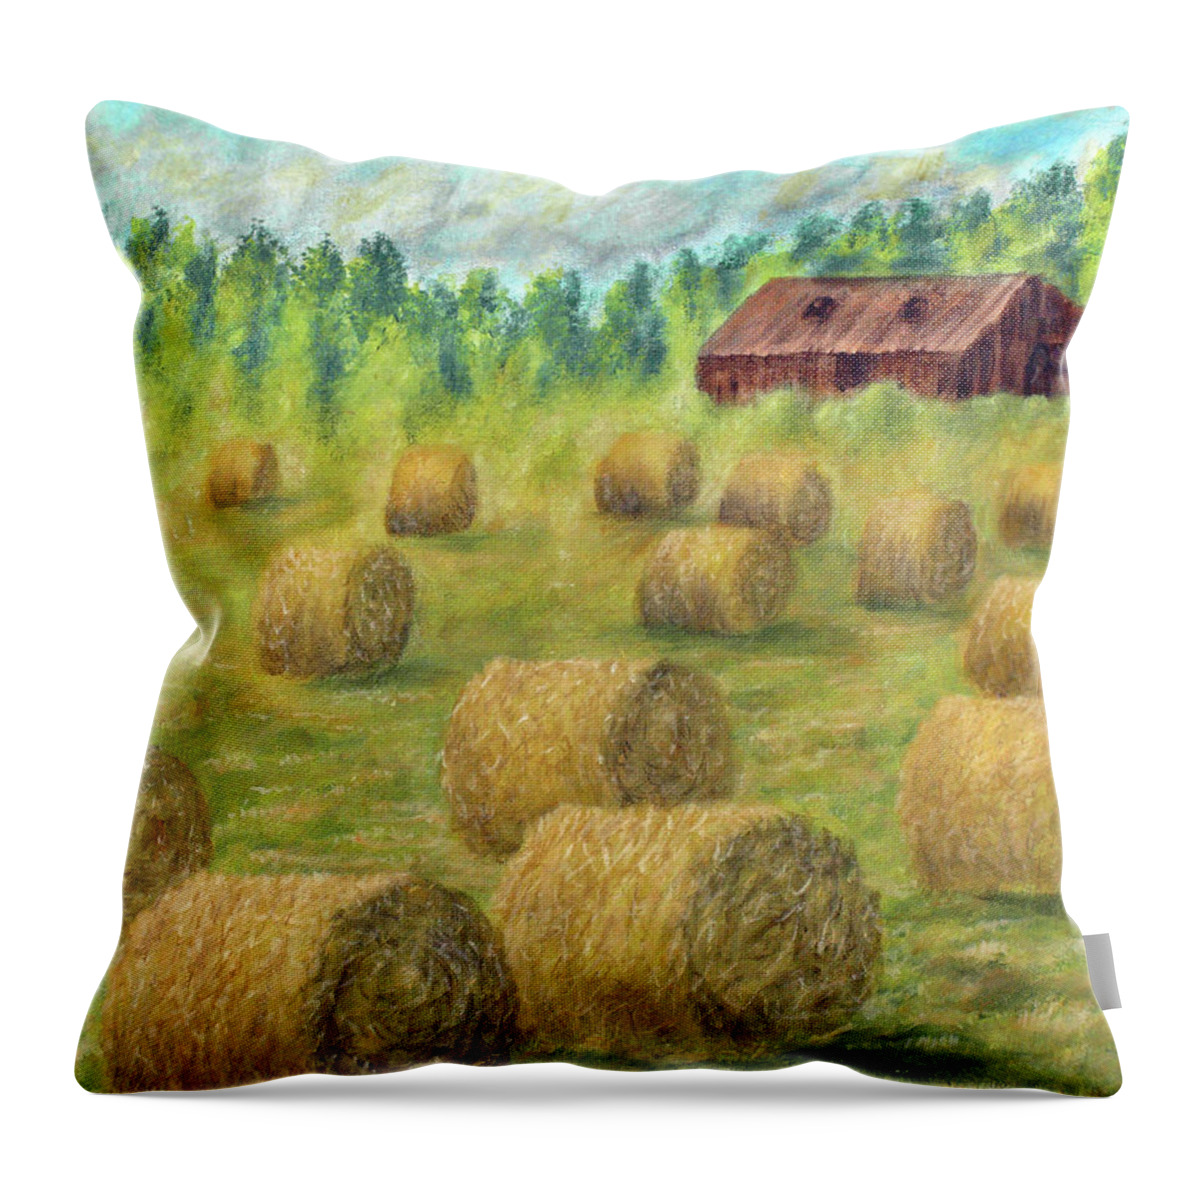 Hay Bales Throw Pillow featuring the painting Hay Bales and Red Barn - Lytham St Annes by Ronald Haber